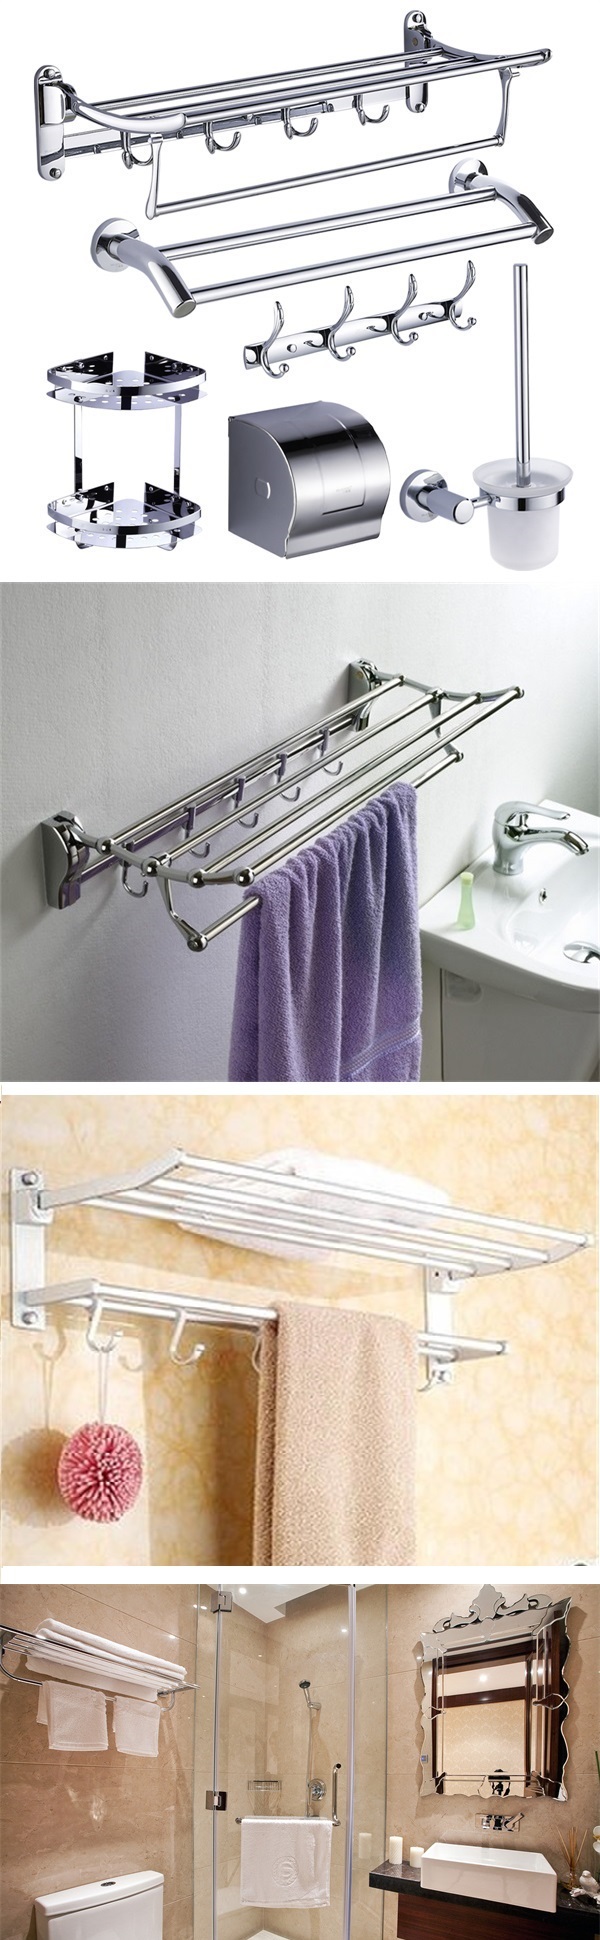 Factory Supplier Stainless Steel Wall Mounted Single Bathroom Towel Bar